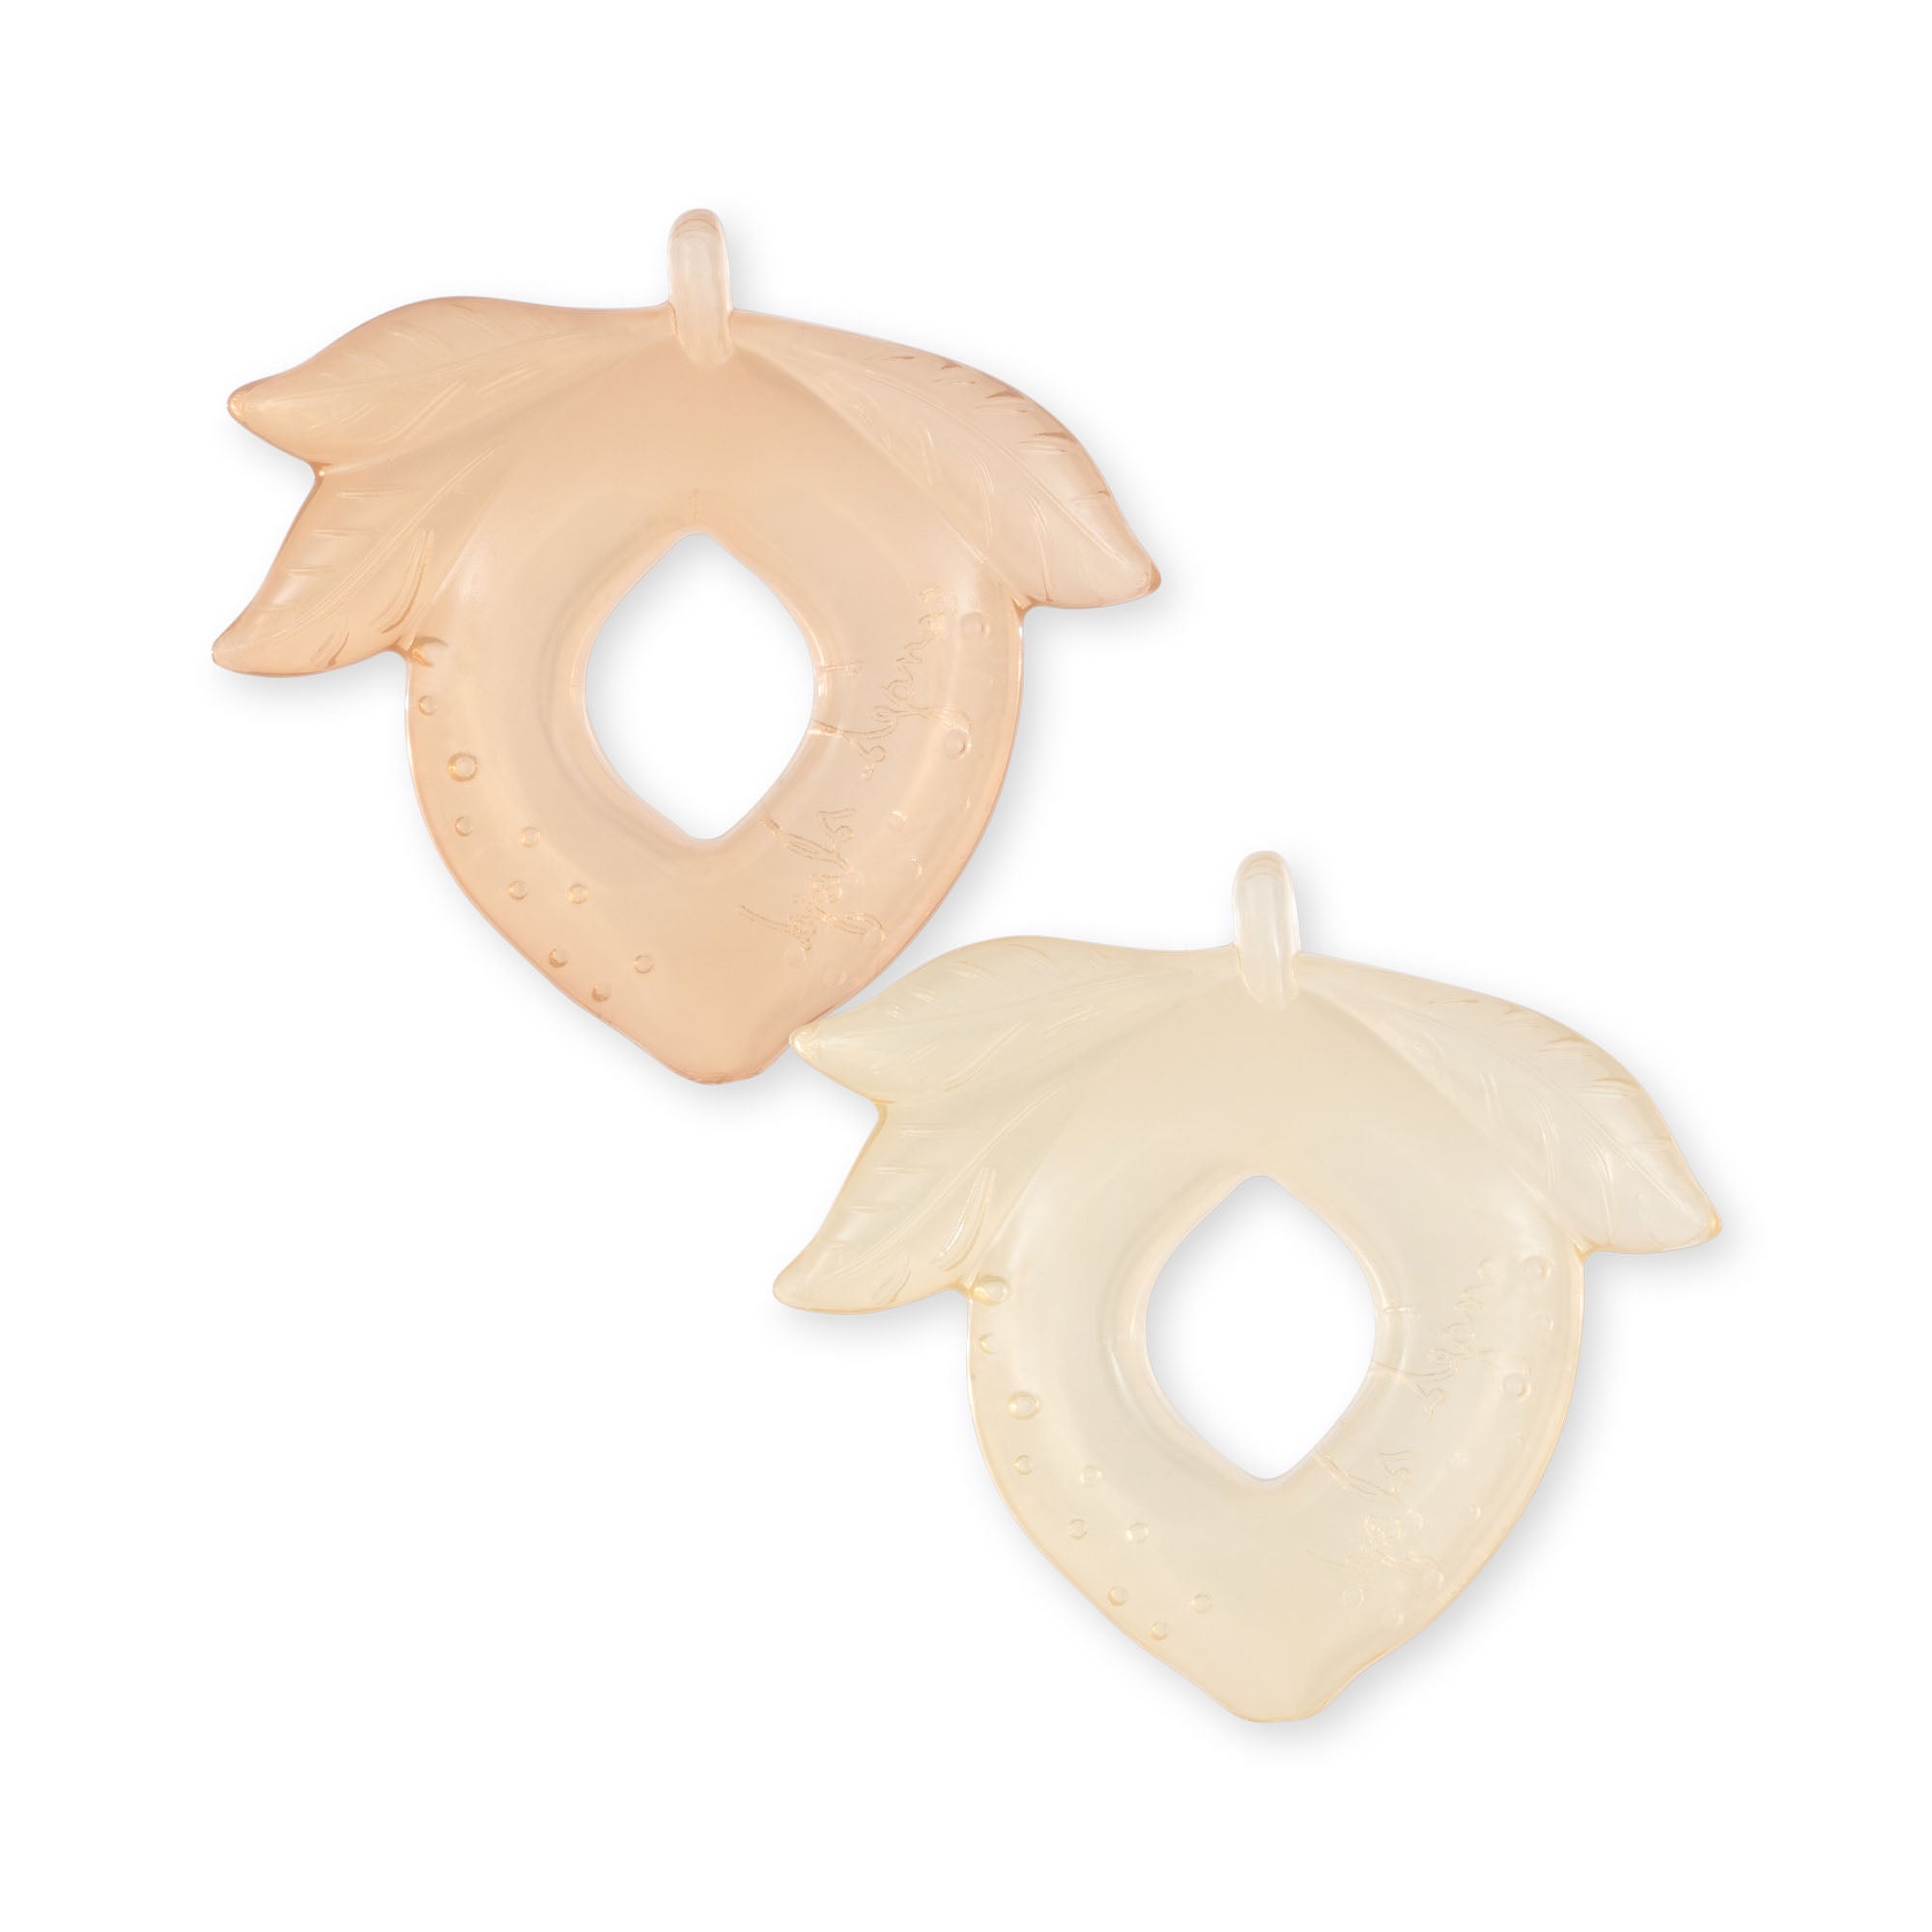 Konges Sløjd A/S 2 PACK LEMON COOLING TEETHERS Teeth soothers BLUSH MIX